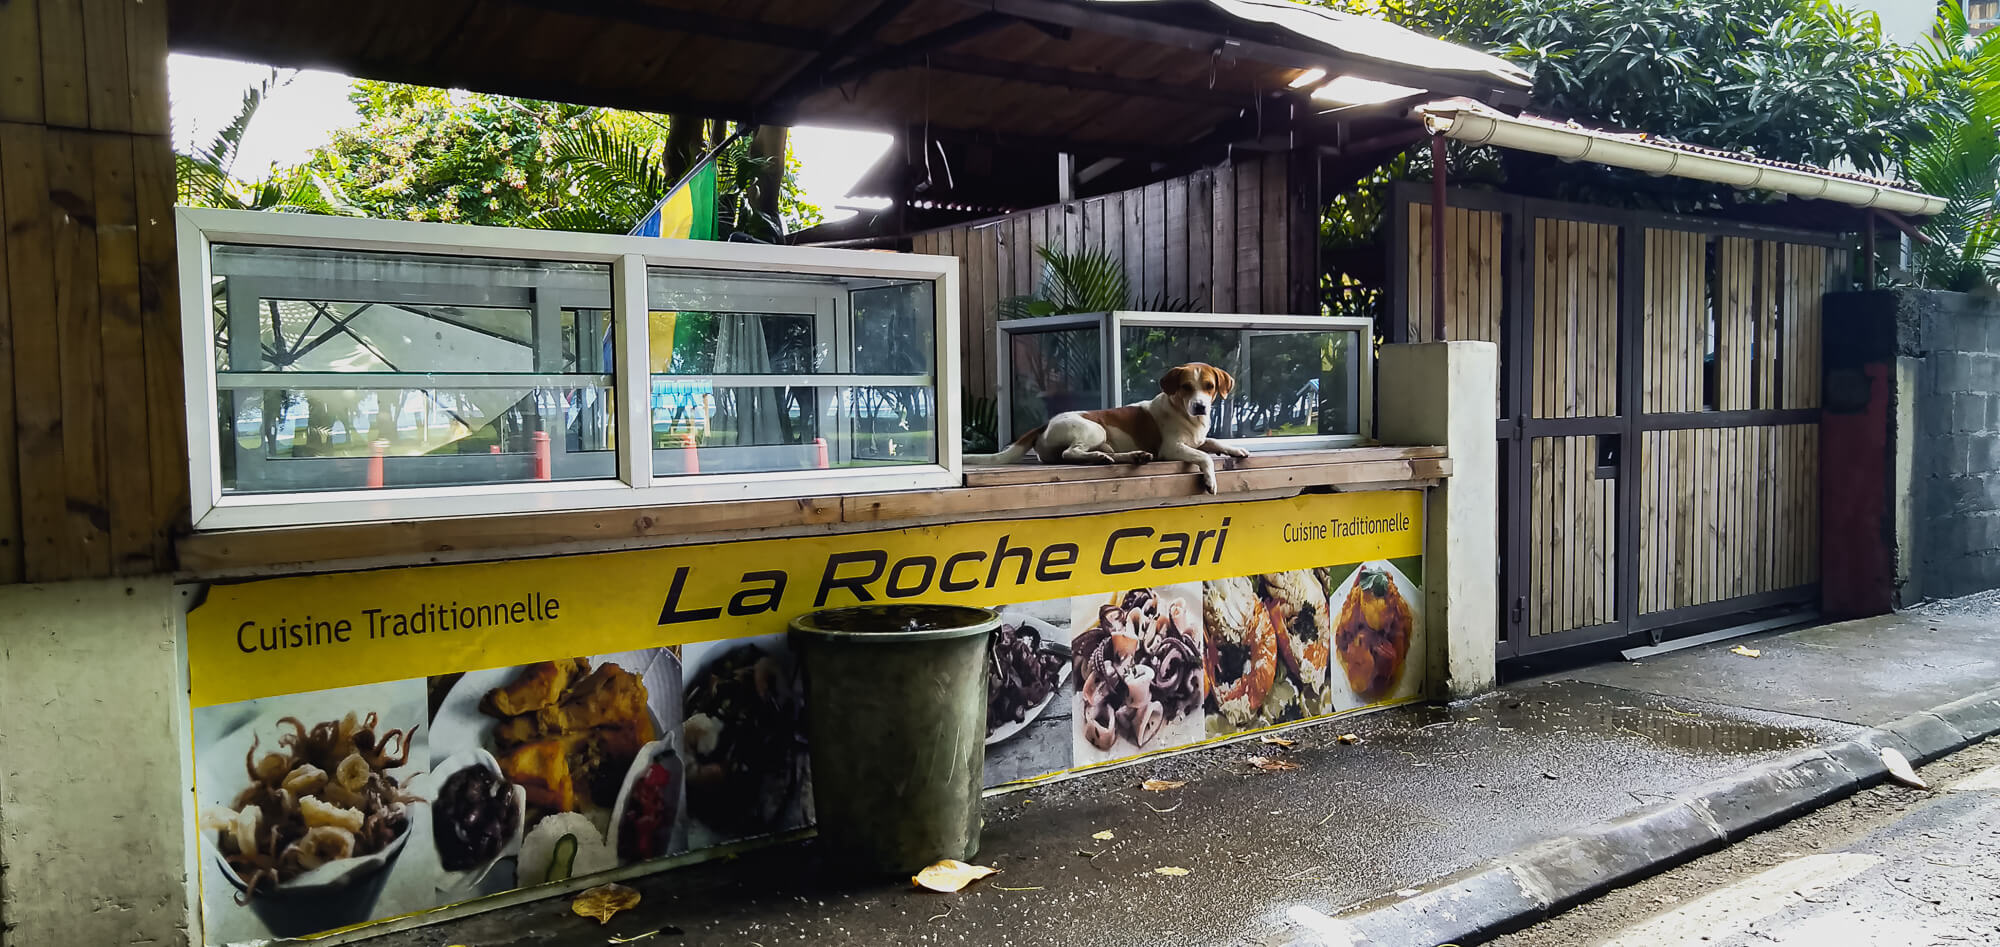 A dog chilling on a street food stall in Mauritius